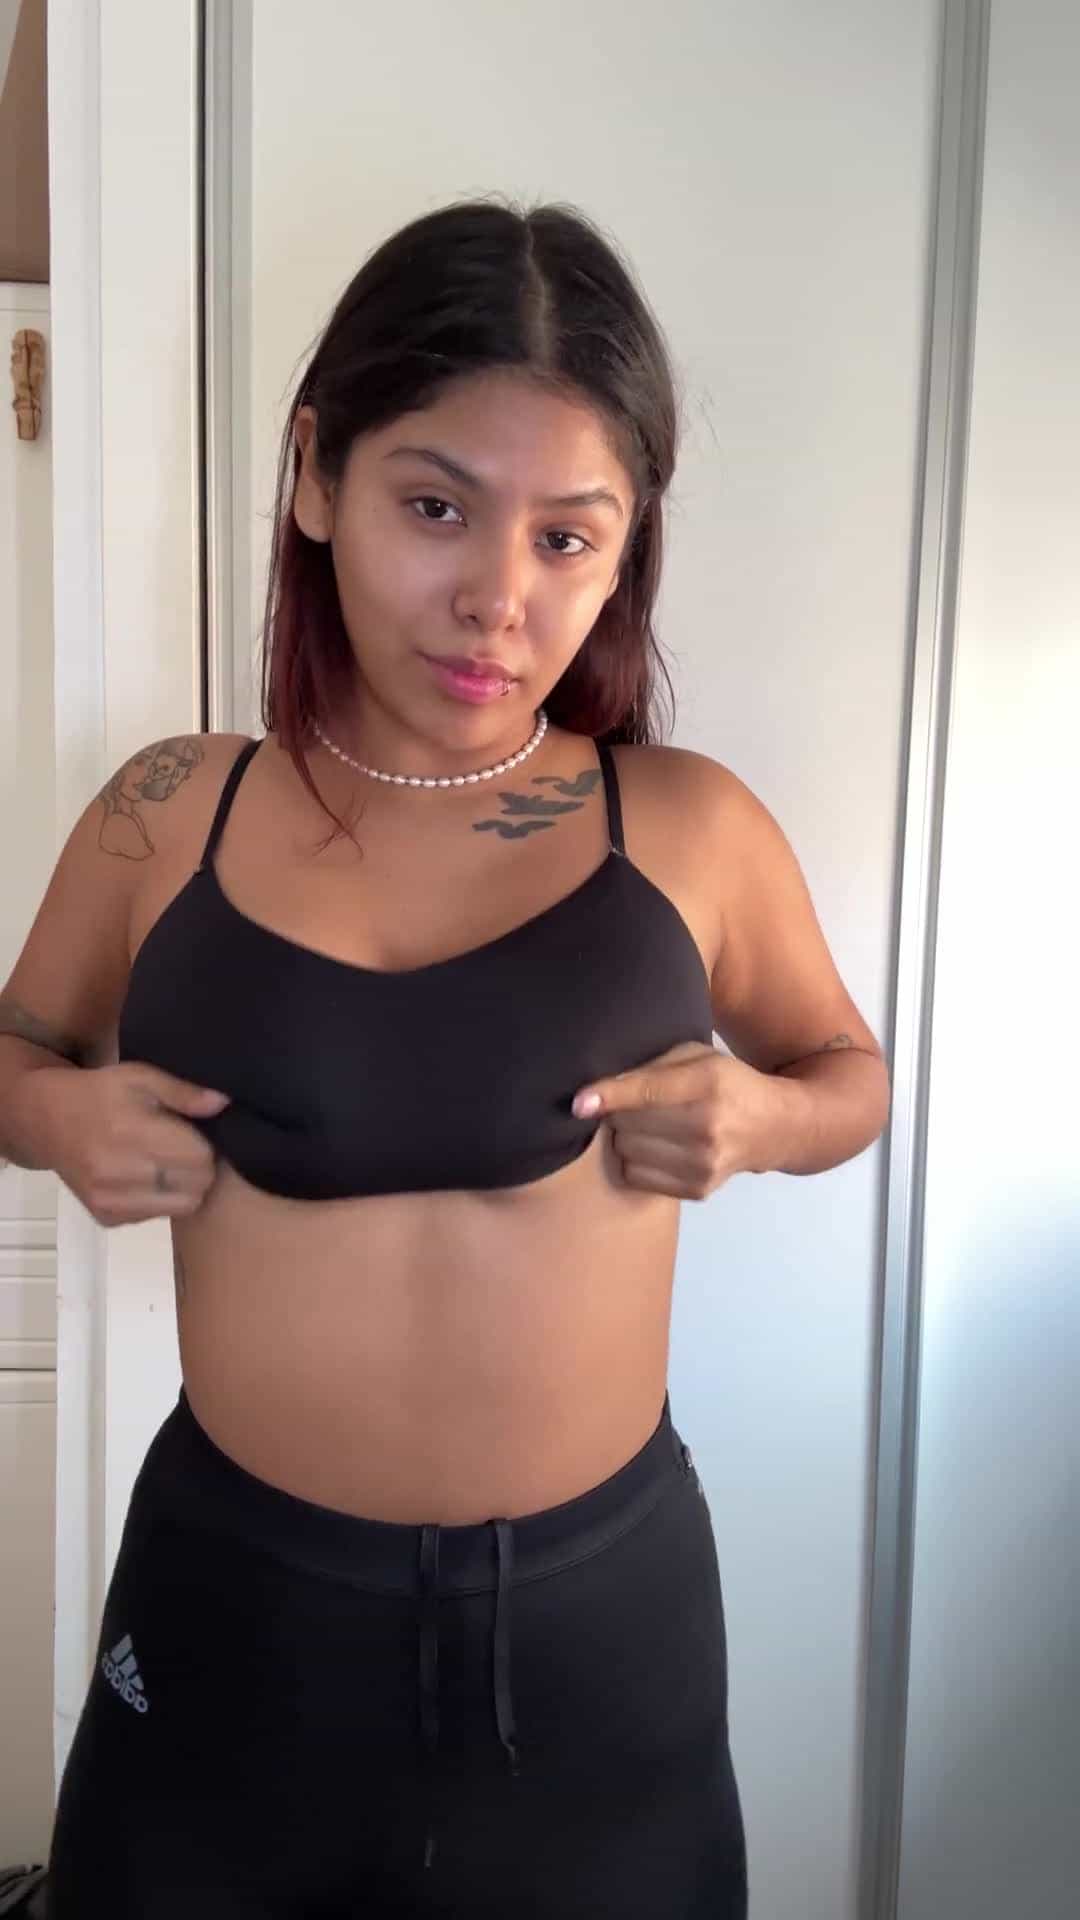 What can you say about my saggy tits?